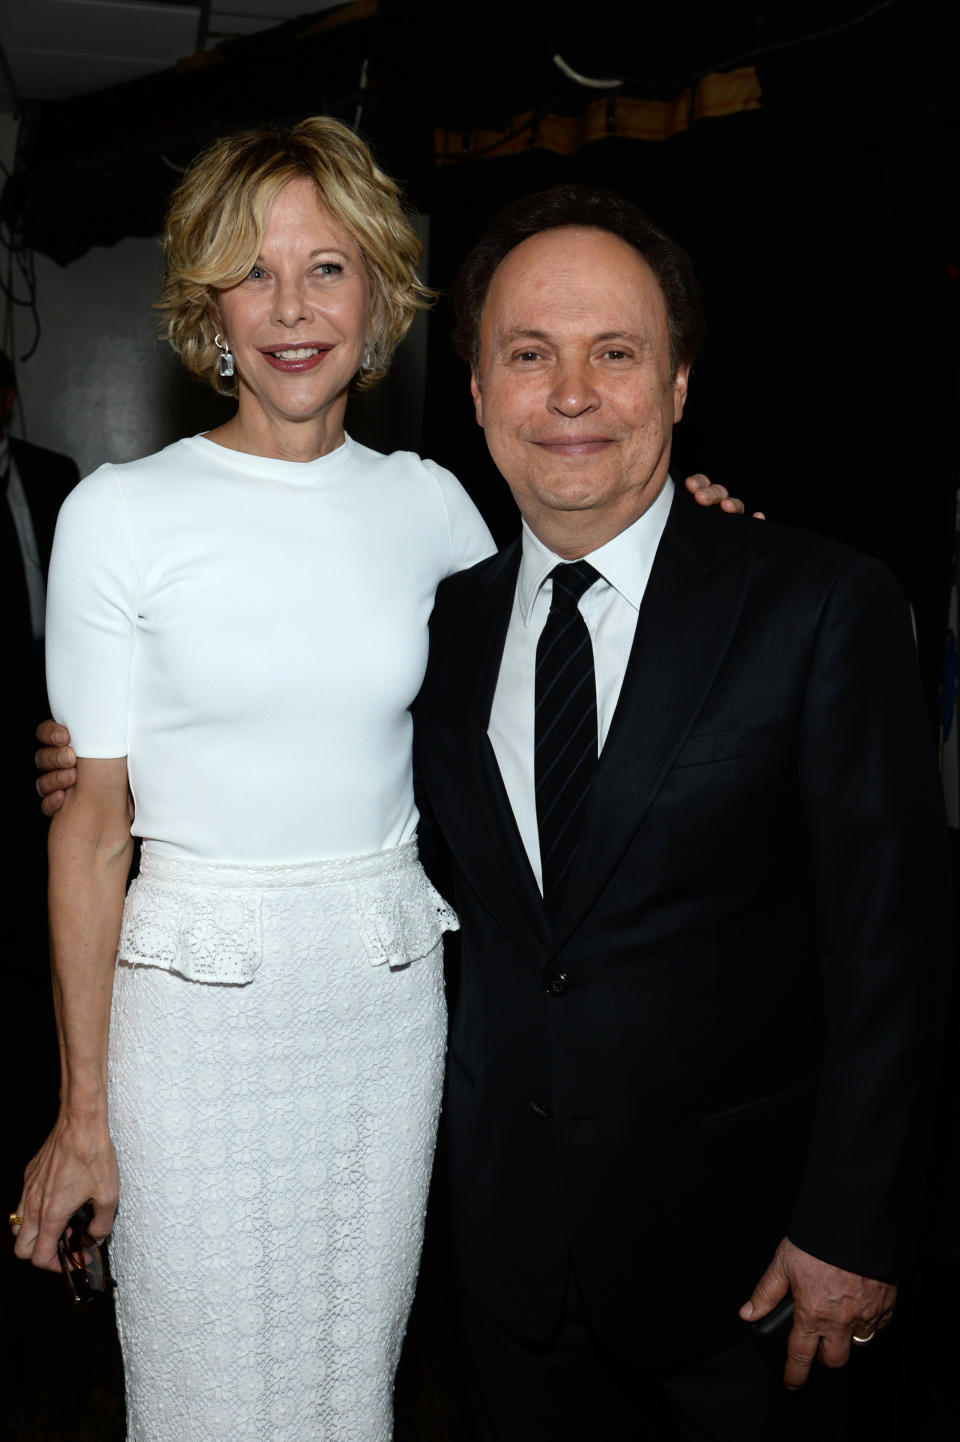 <p>"When Harry Met Sally" co-stars&nbsp;Meg Ryan and Billy Crystal reunited at&nbsp;the 41st Annual Chaplin Award Gala at Avery Fisher Hall at Lincoln Center for the Performing Arts on April 28, 2014 in New York City.</p>